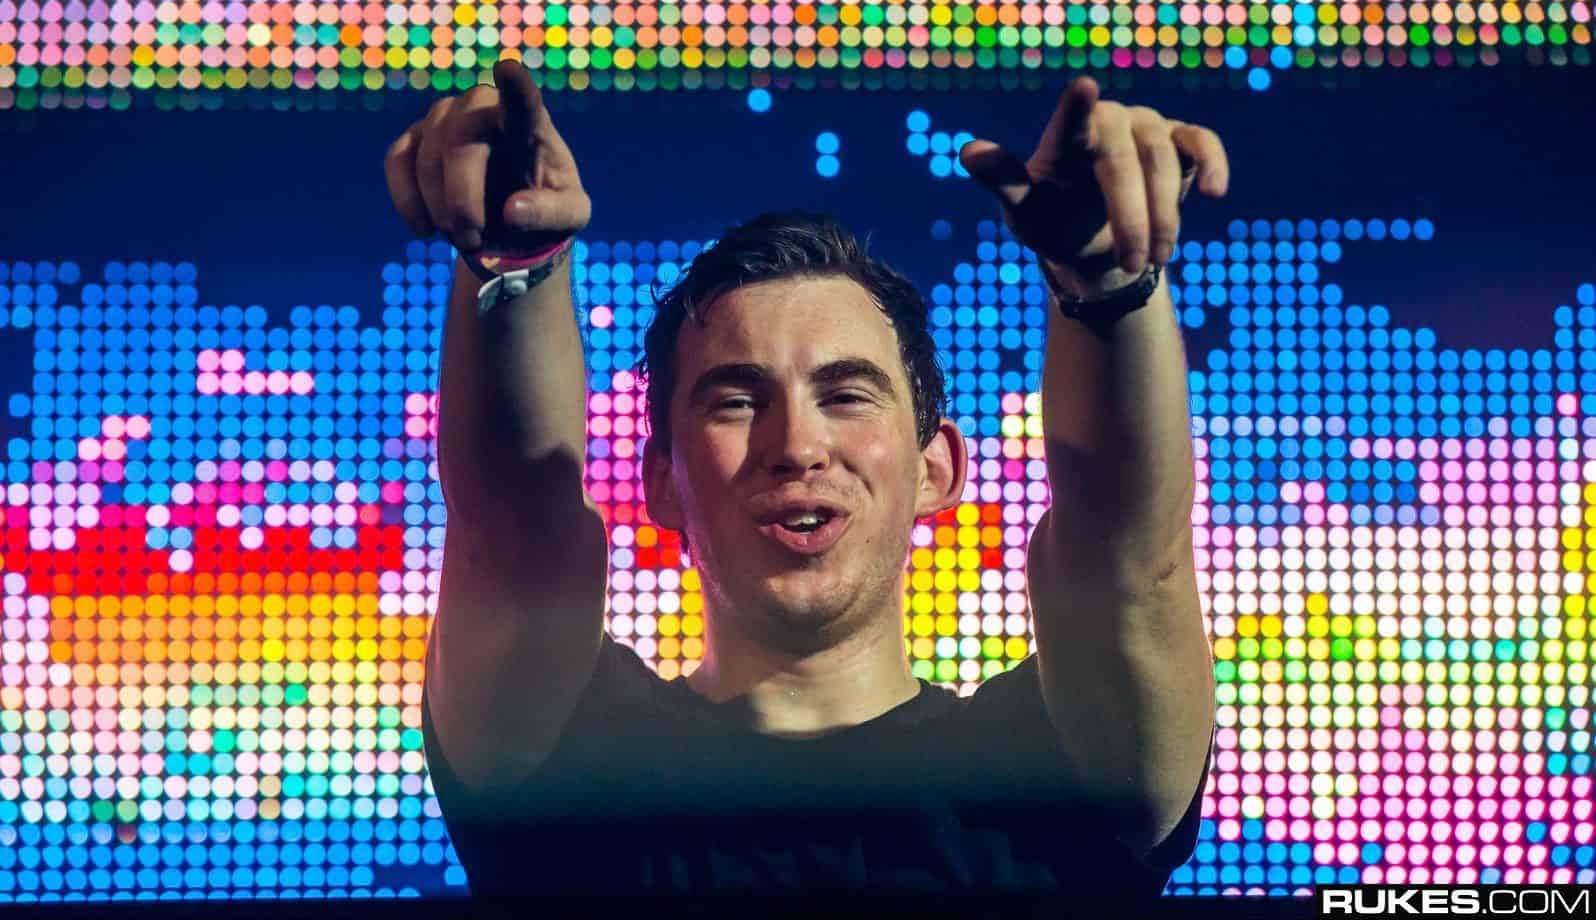 Hardwell classic ‘Spaceman’ turns 9 years old